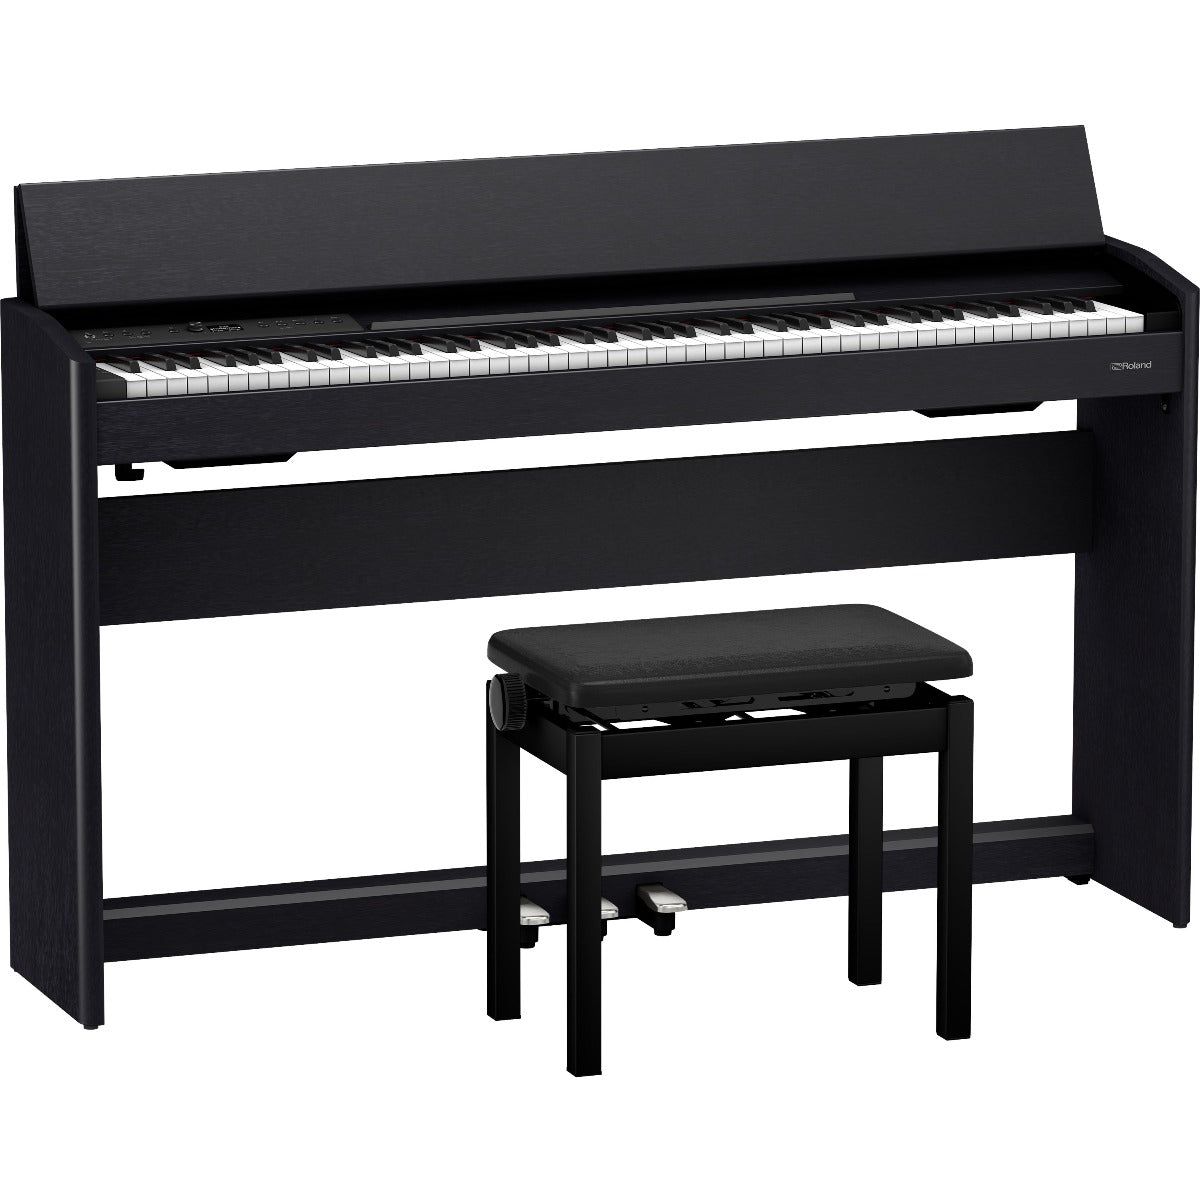 3/4 view of Roland F701 Digital Piano - Contemporary Black with included BNC-05 matching bench showing front, top and left sides